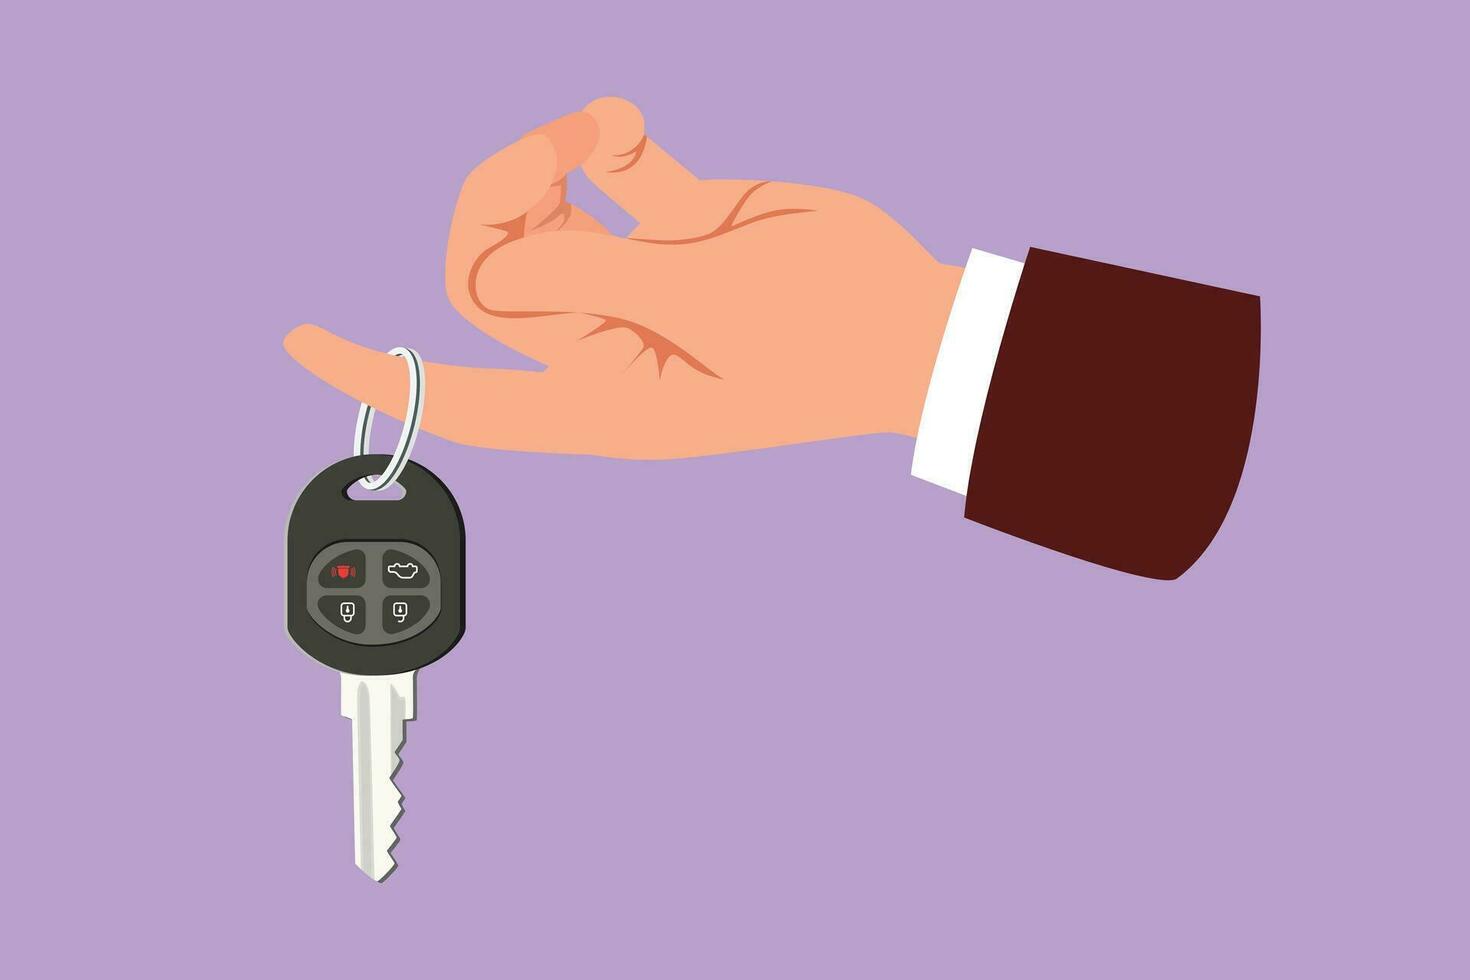 Cartoon flat style drawing hand holding hanging car key and alarm system. Hand holding car key with alarm keychain. Hand of car salesman manager holding key symbol. Graphic design vector illustration